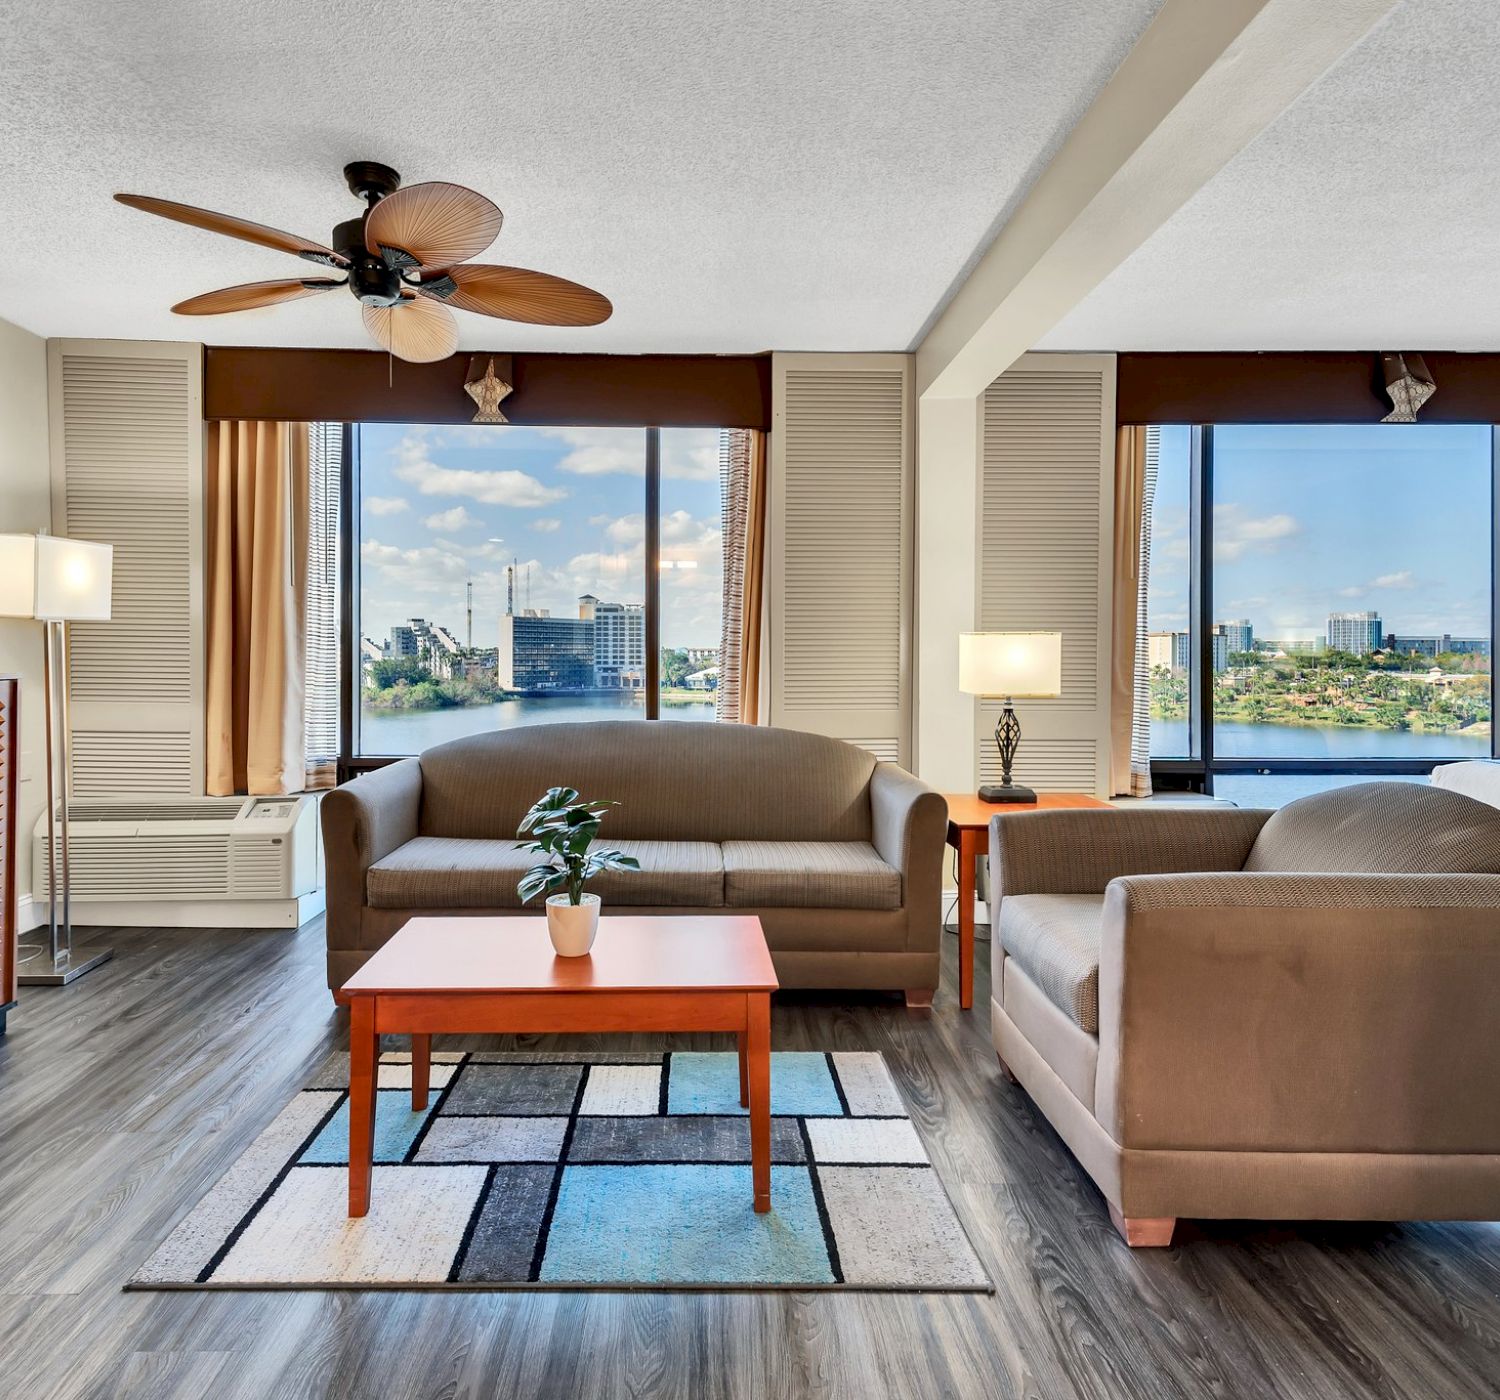 A modern hotel room features seating, decor, a ceiling fan, bed, and large windows with city views, creating a comfortable and inviting space.